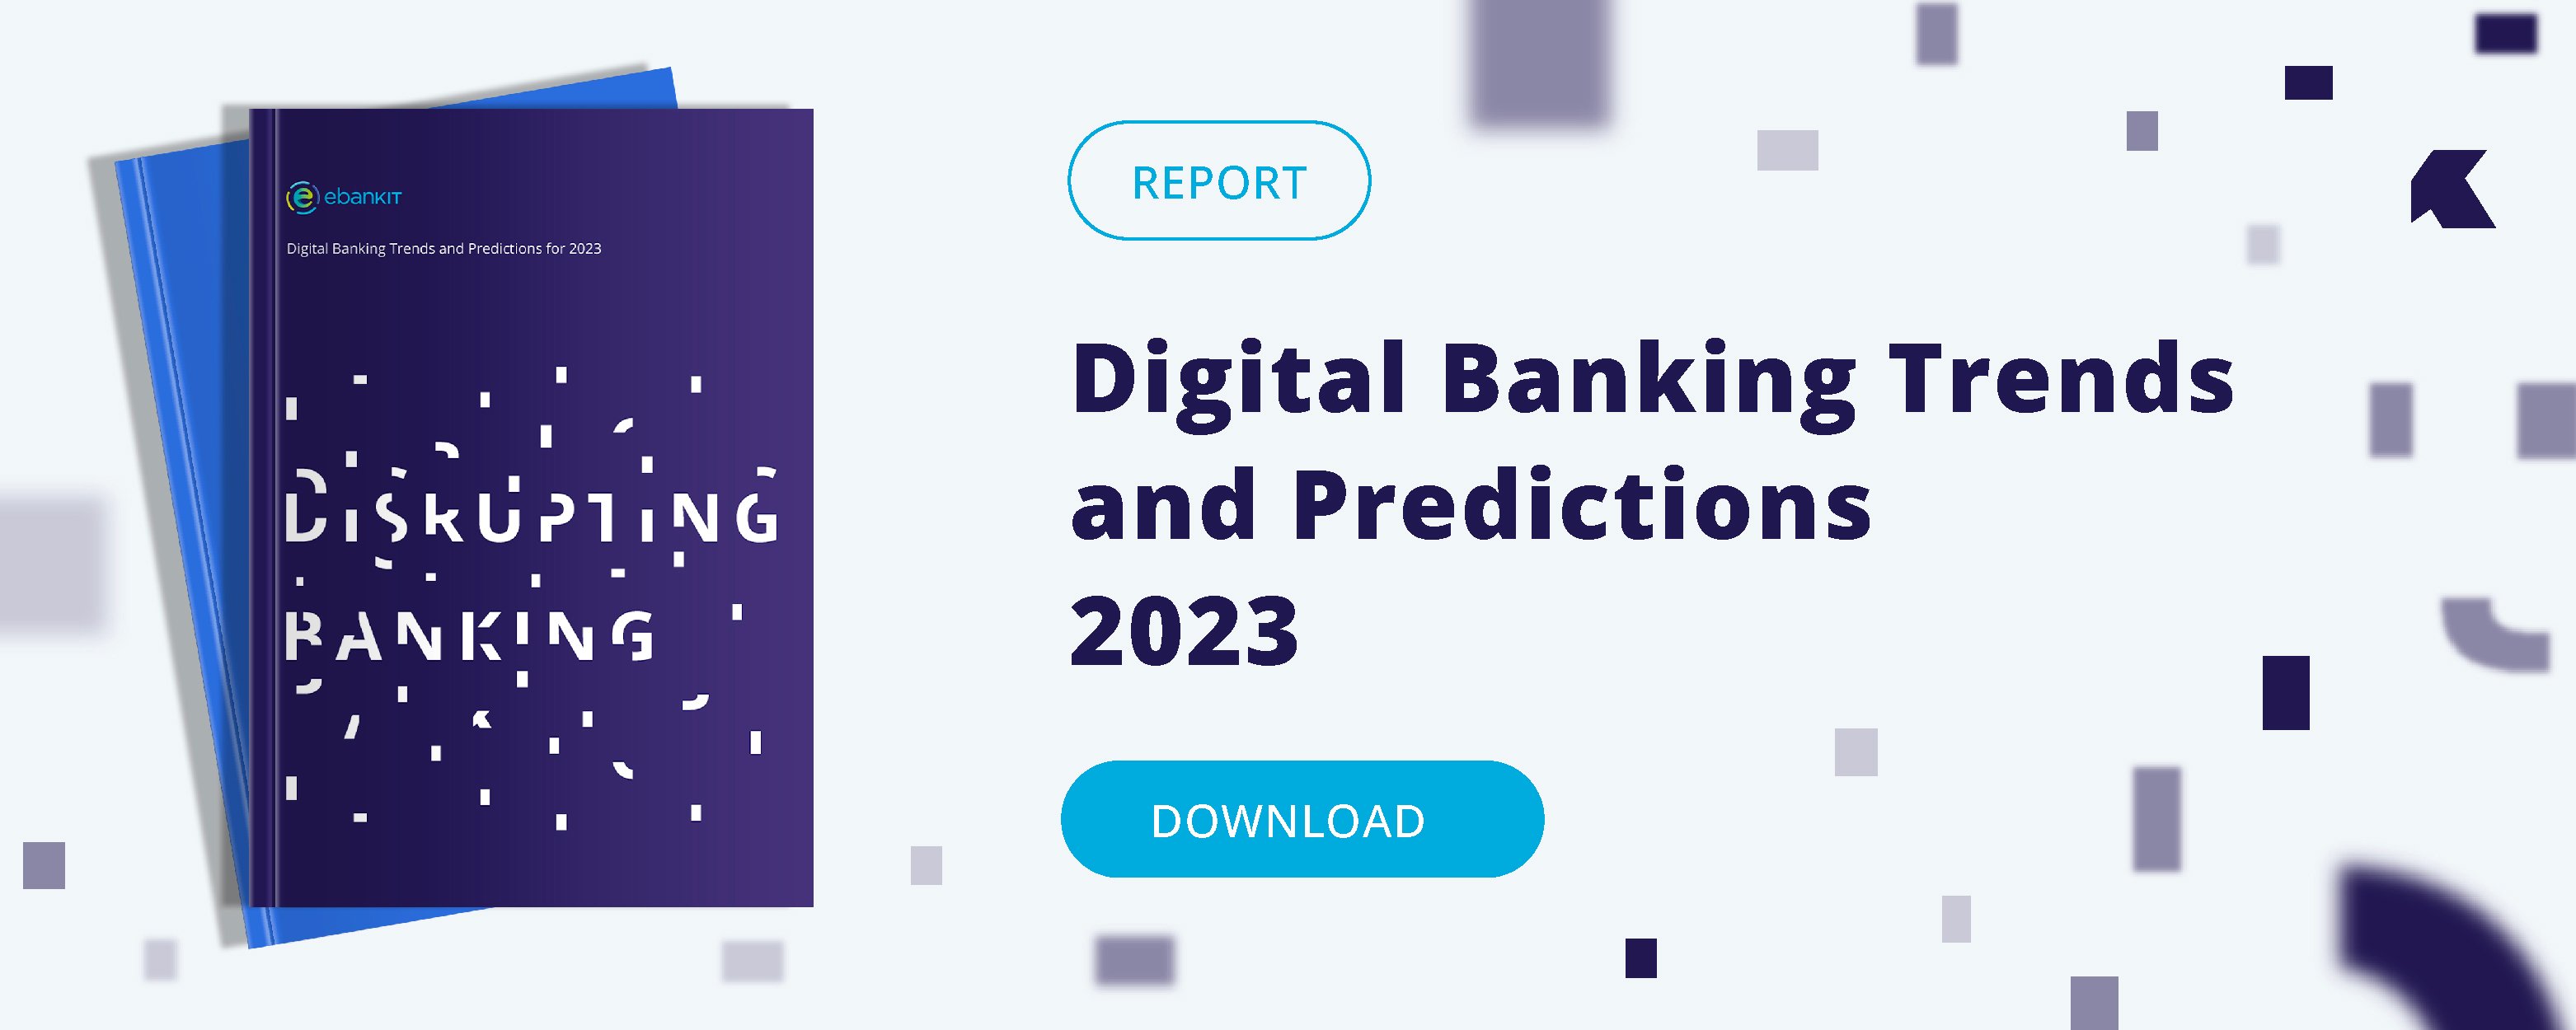 digital banking trends and predictions for 2023